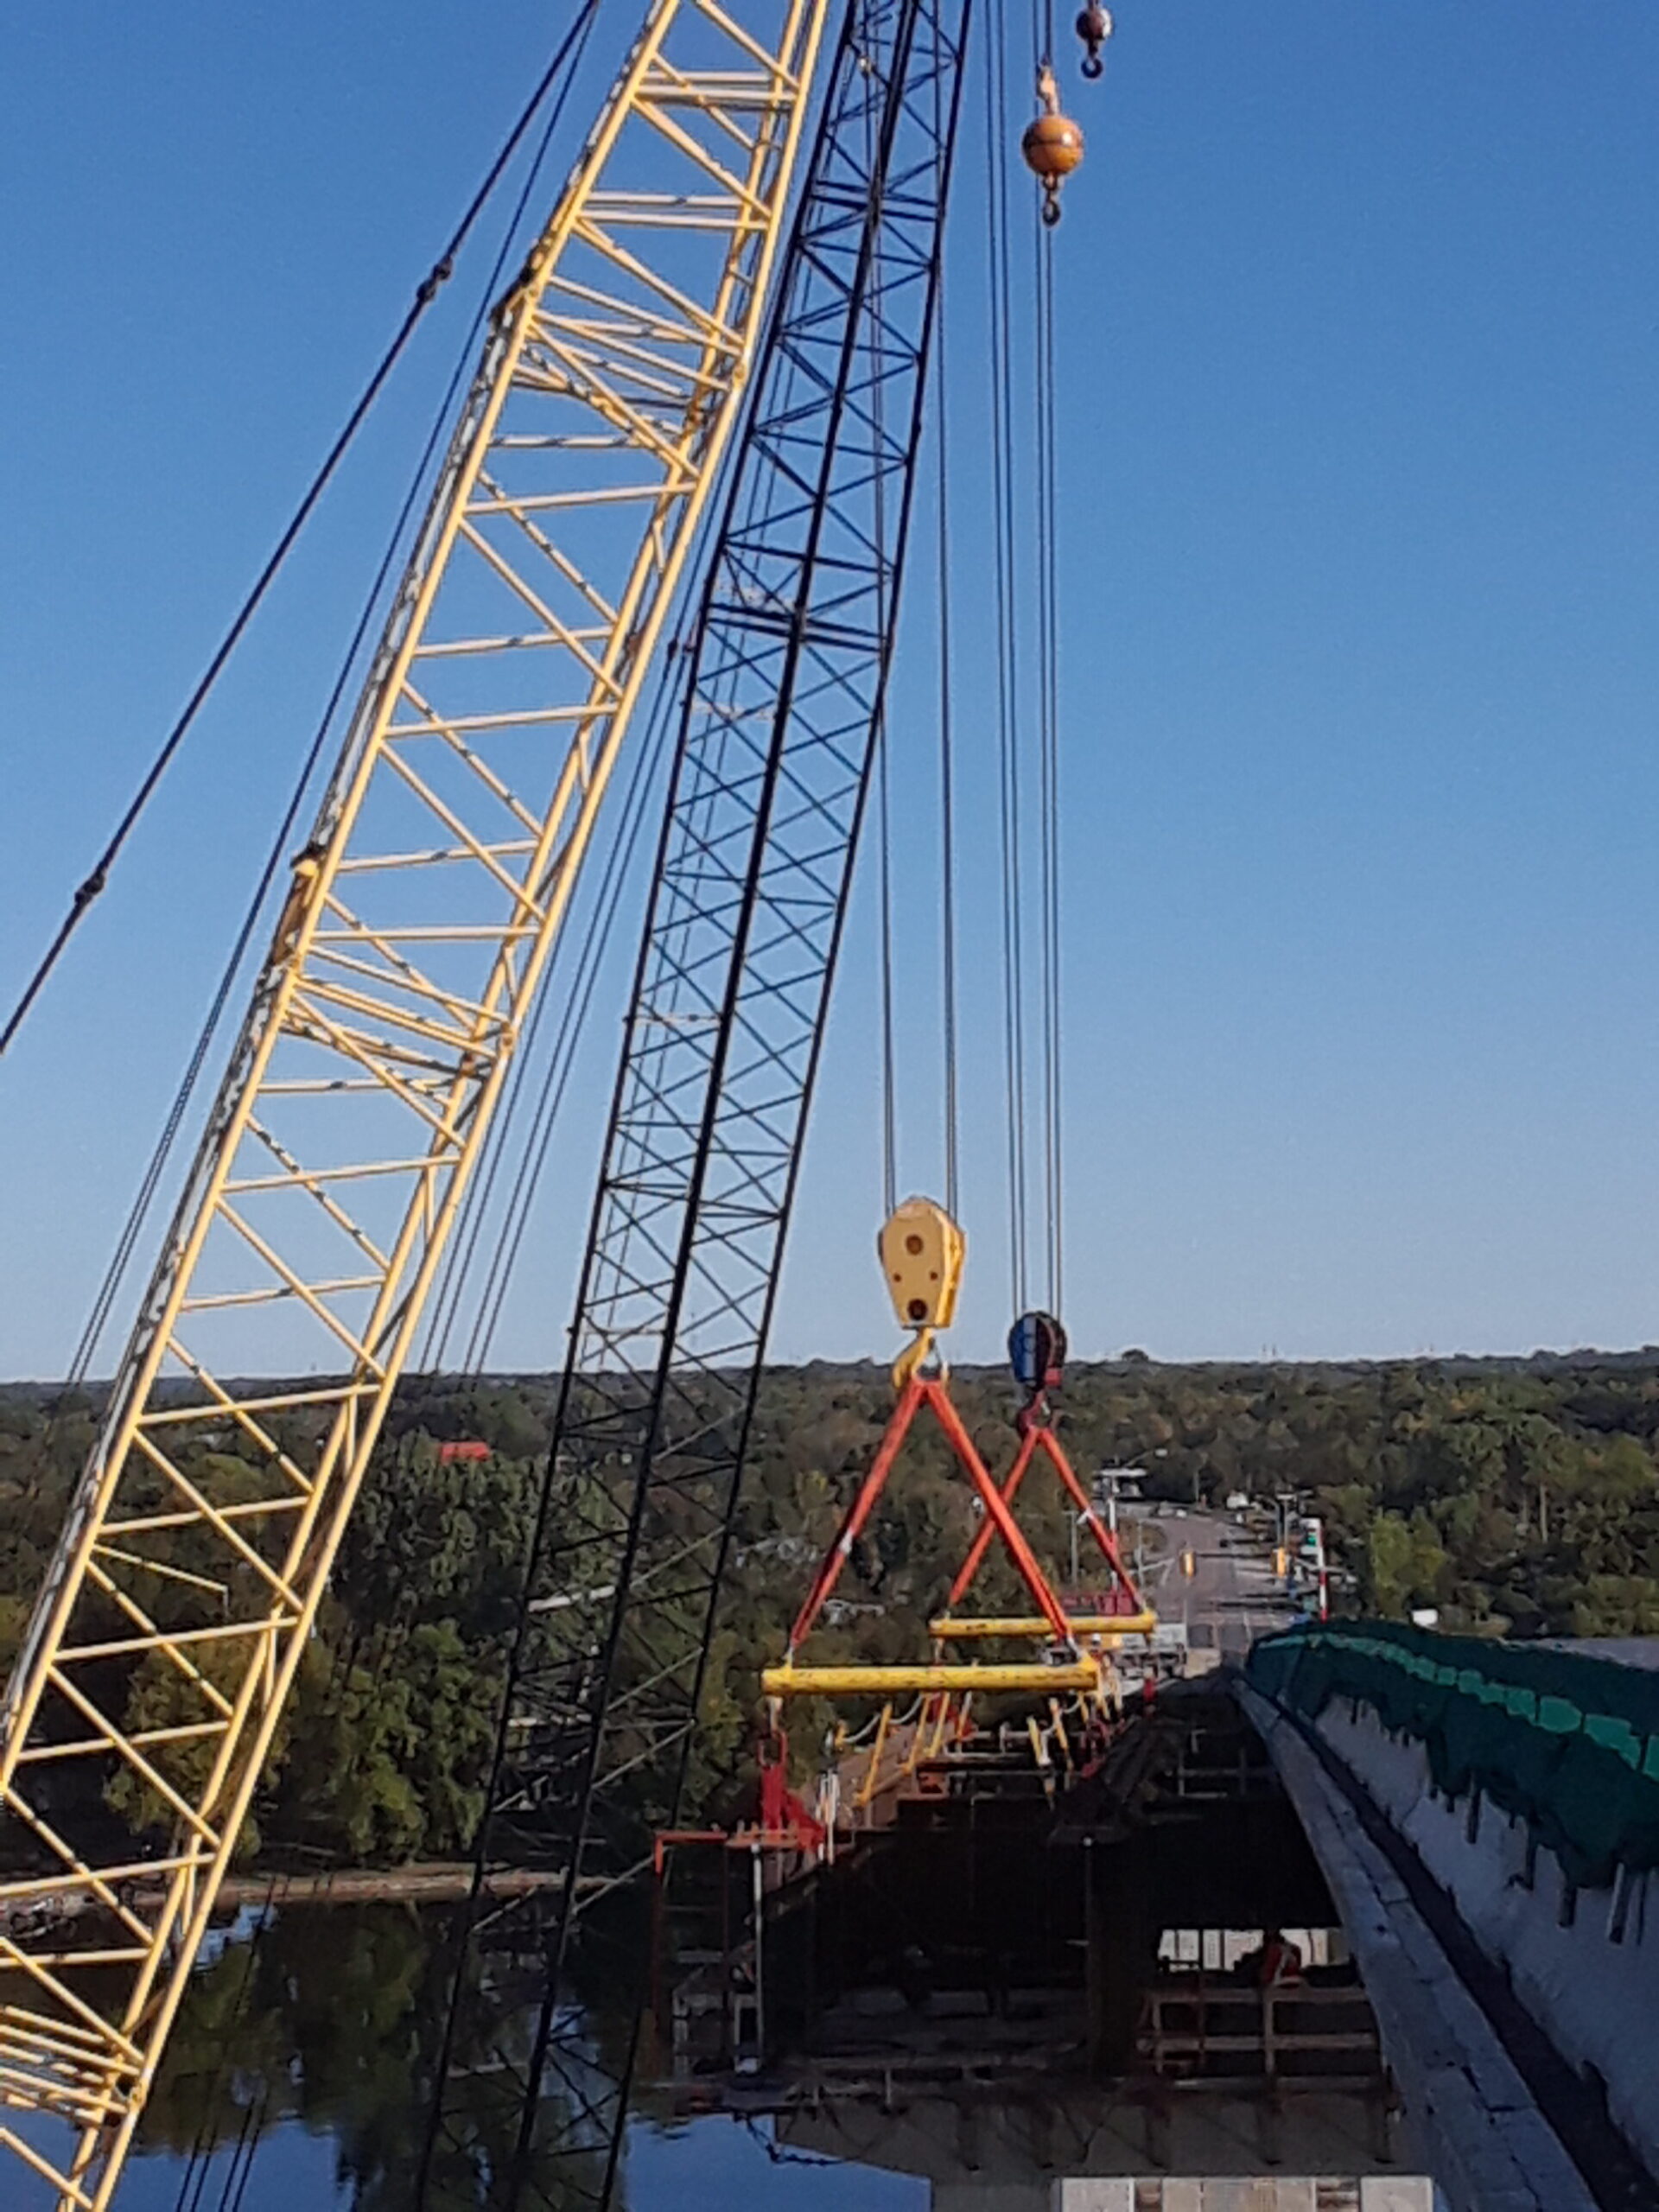 Haunch girder being moved into place